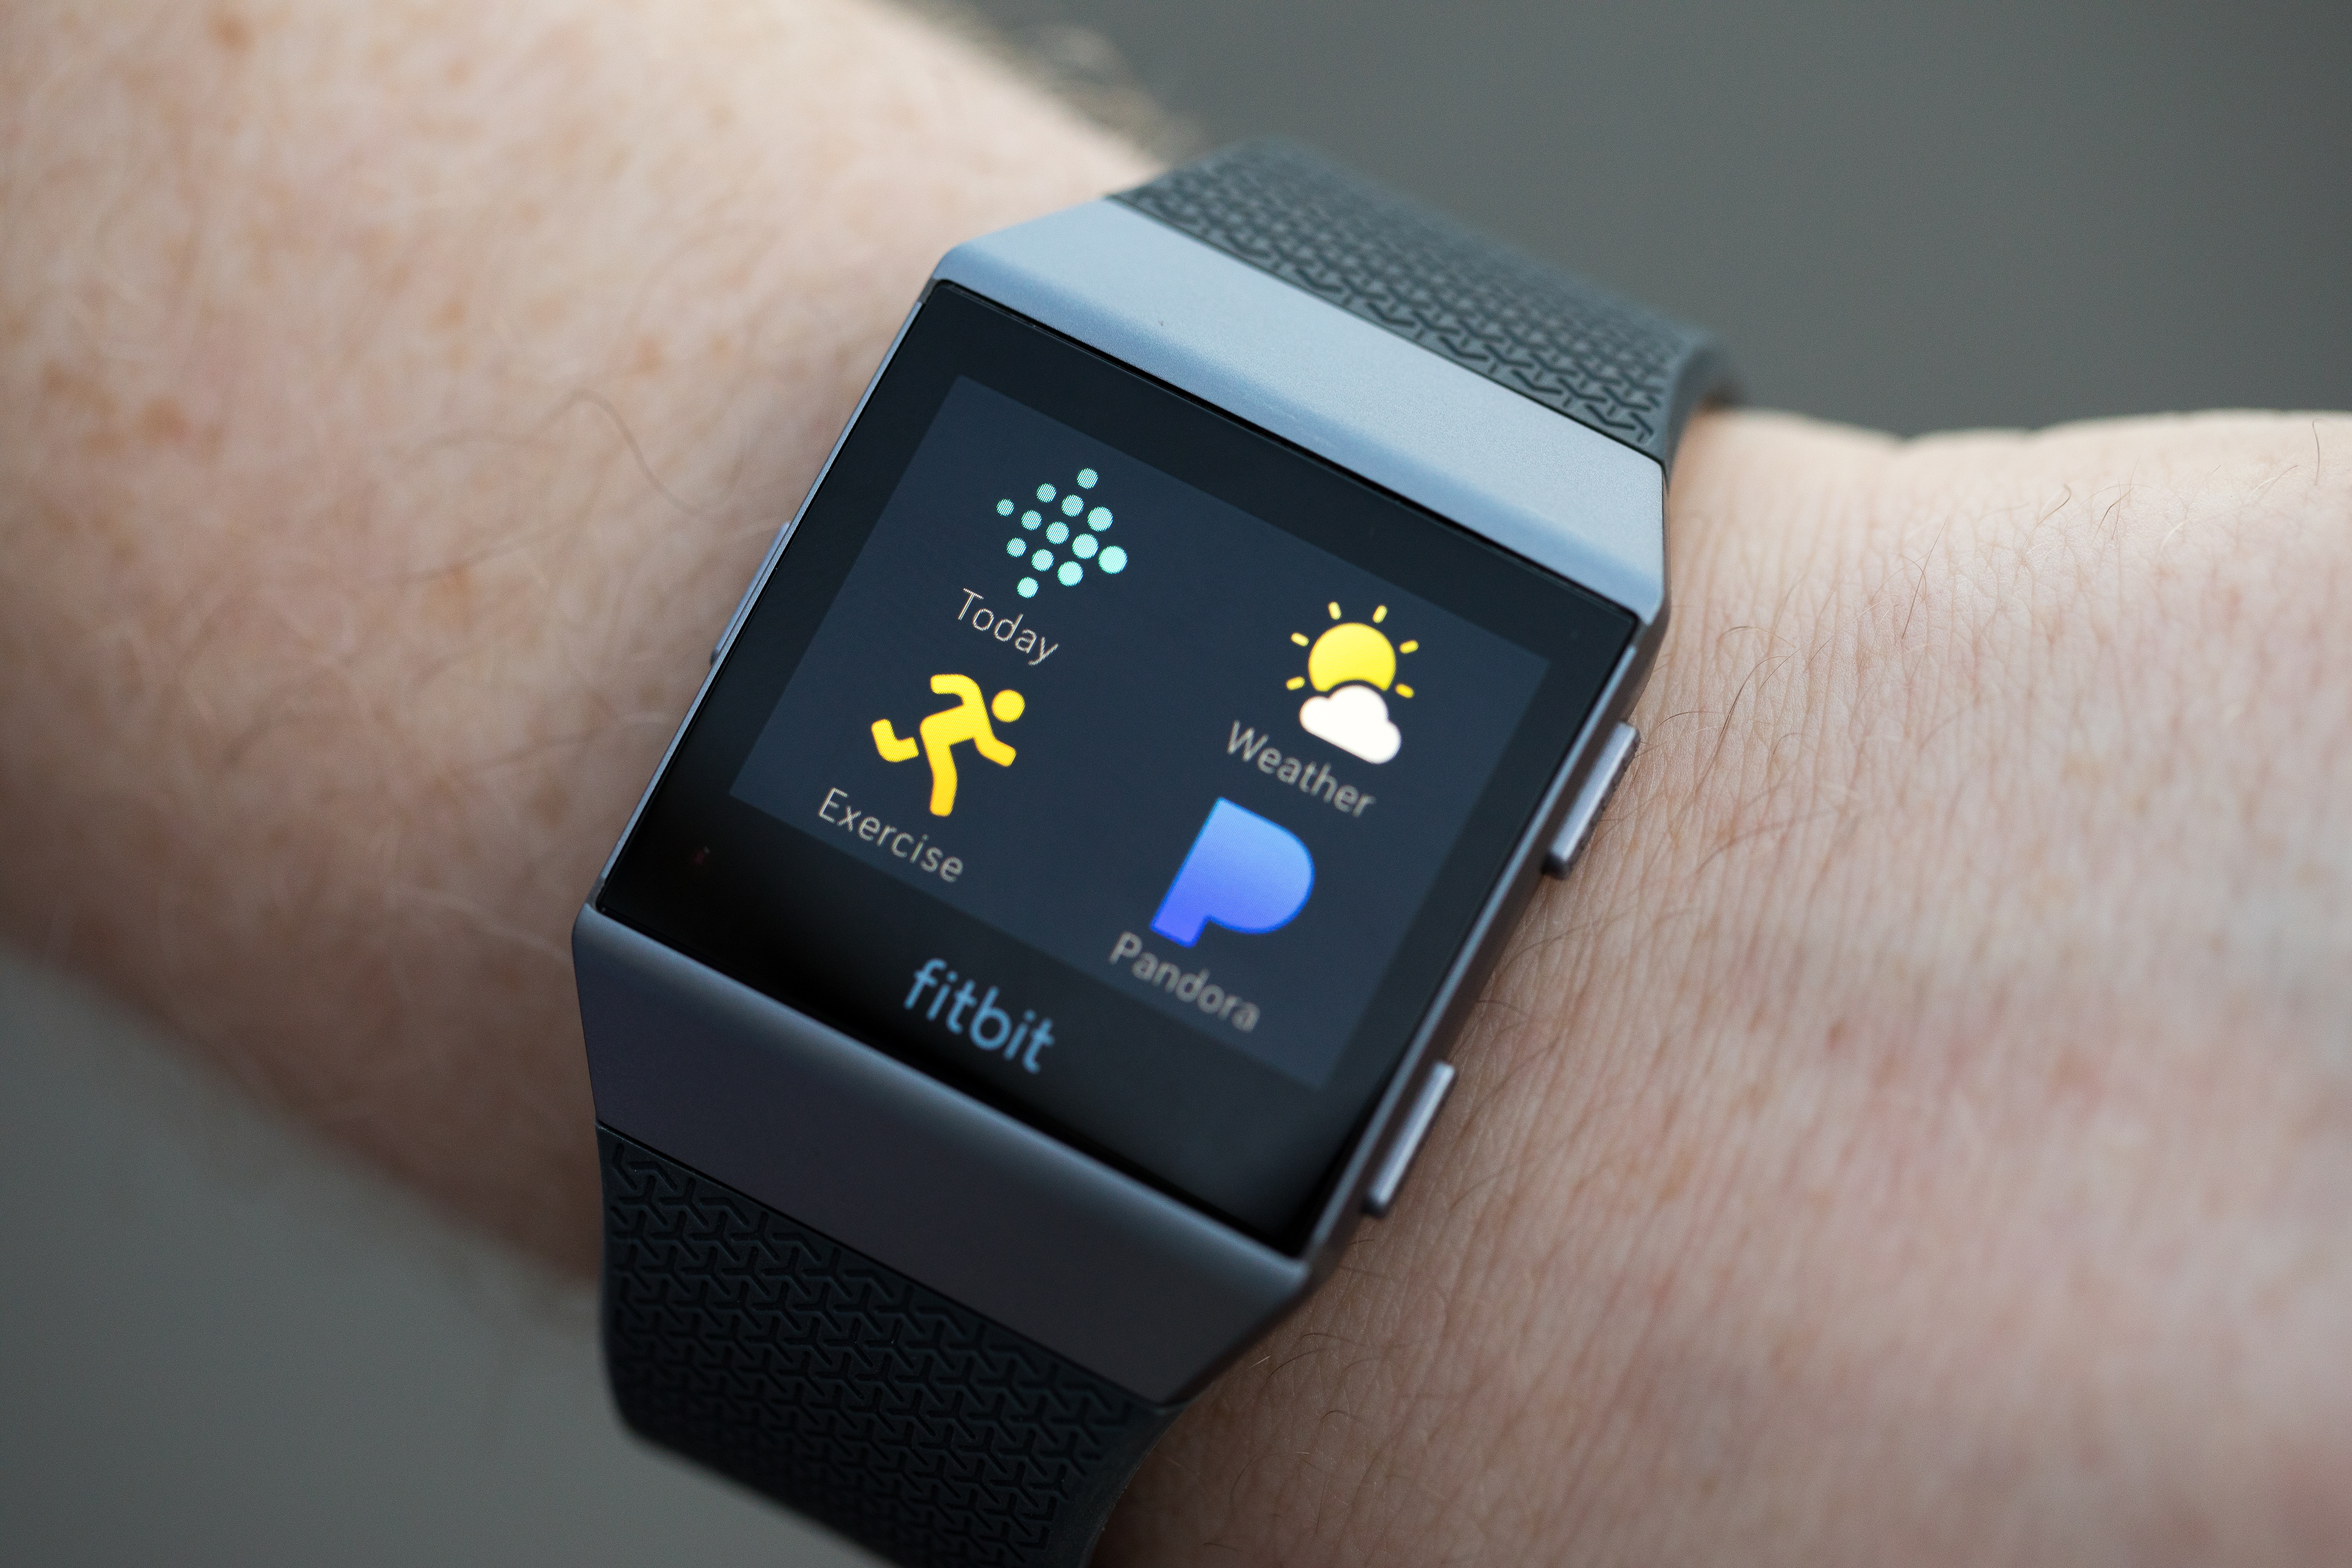 Fitbit Ionic review: Does Fitbit's first smartwatch deliver on its promises?